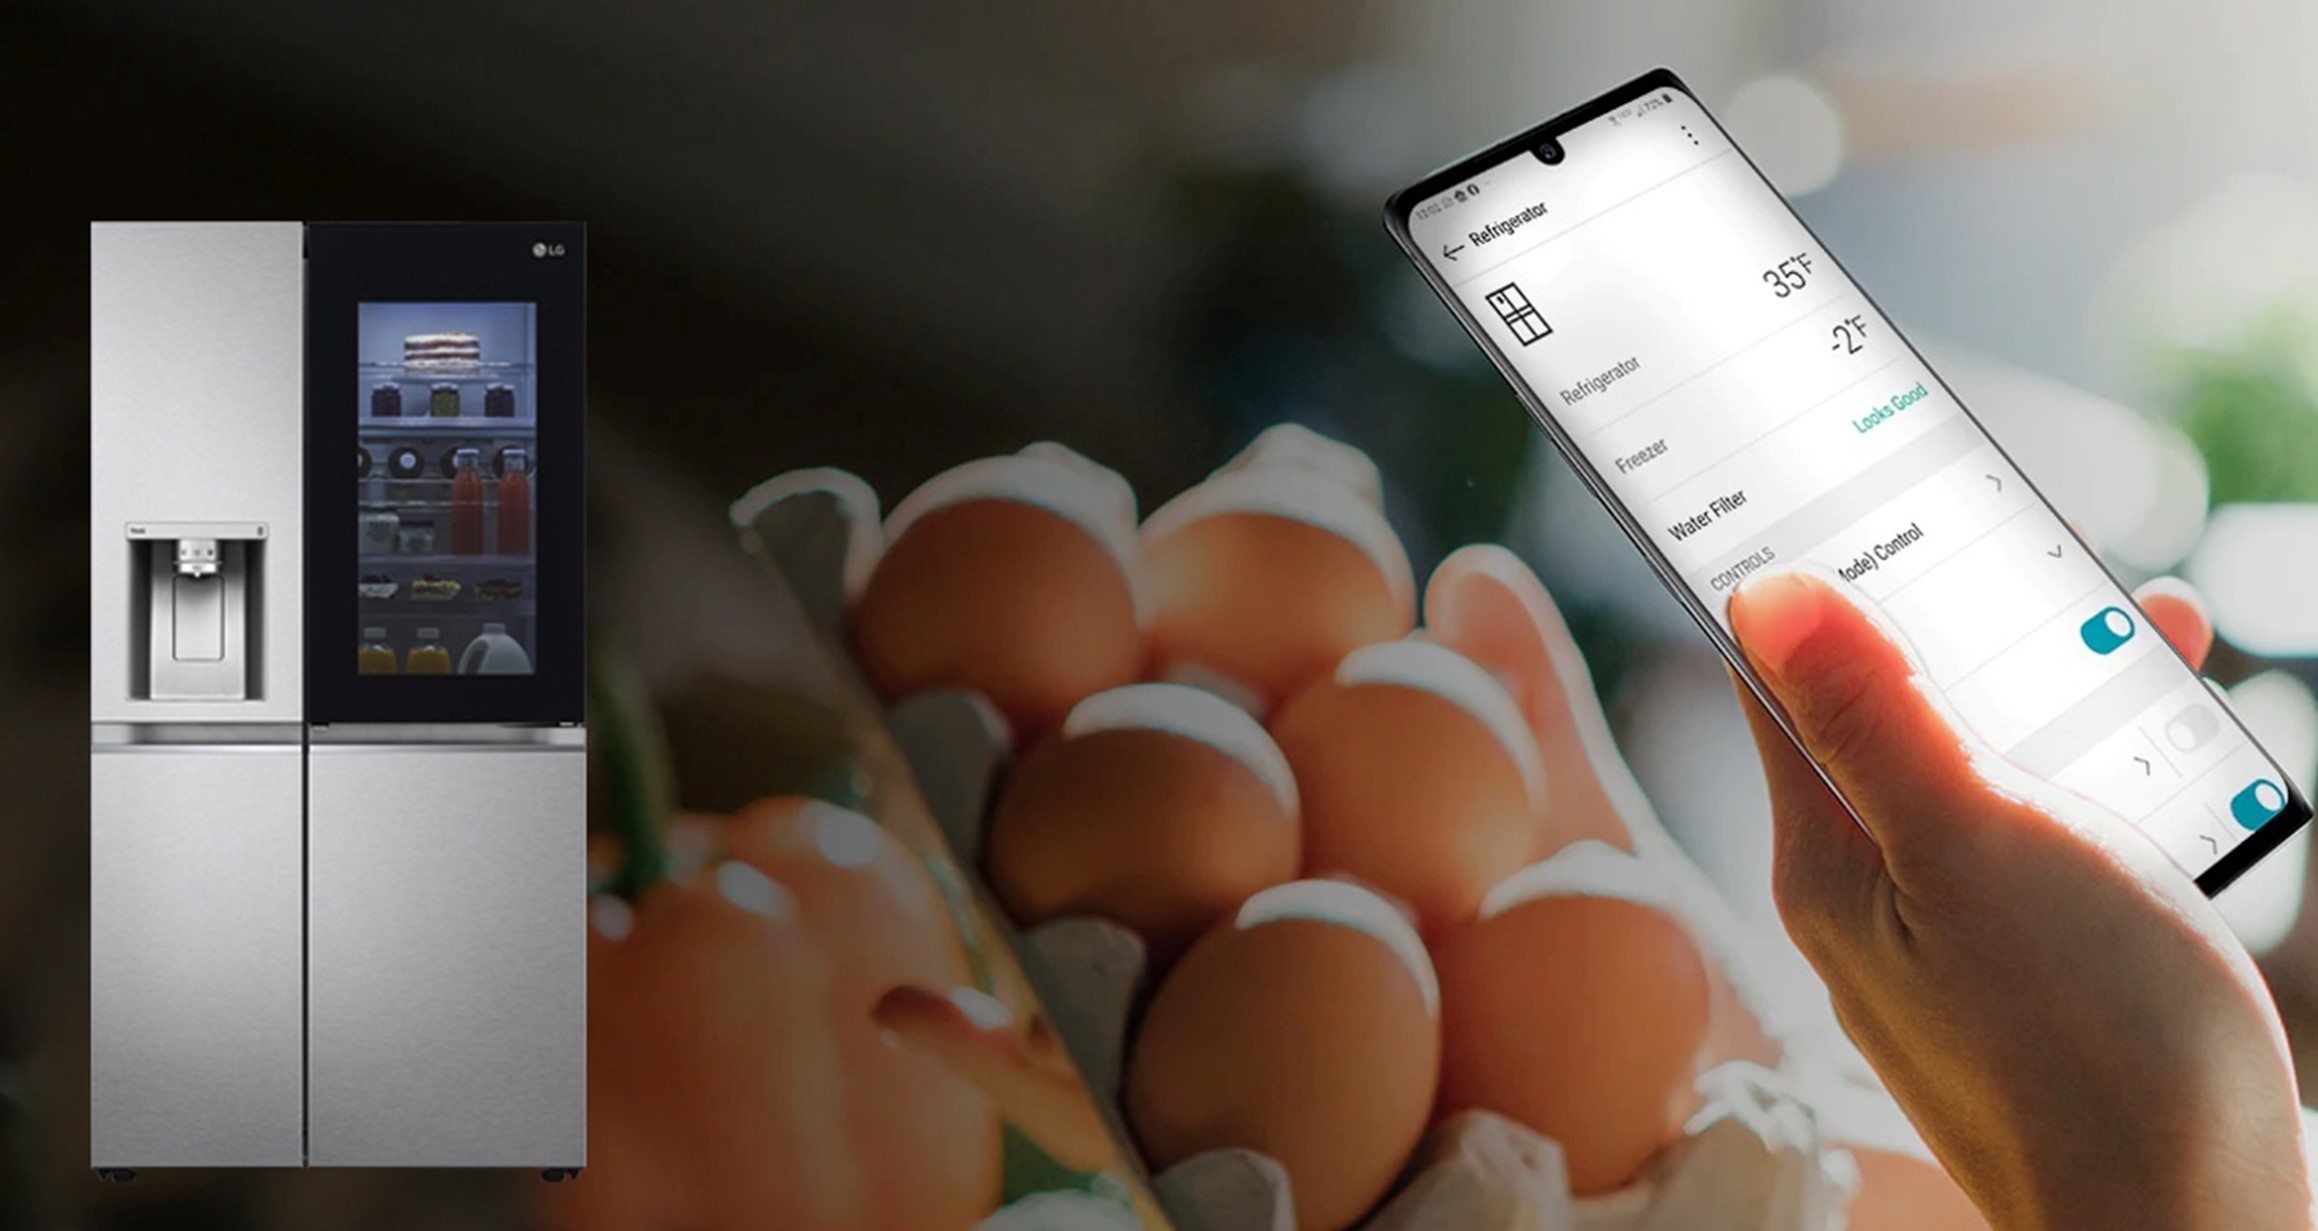 Someone using the LG ThinQ app on their smartphone to monitor the LG InstaView refrigerator, with a box of eggs in the background.